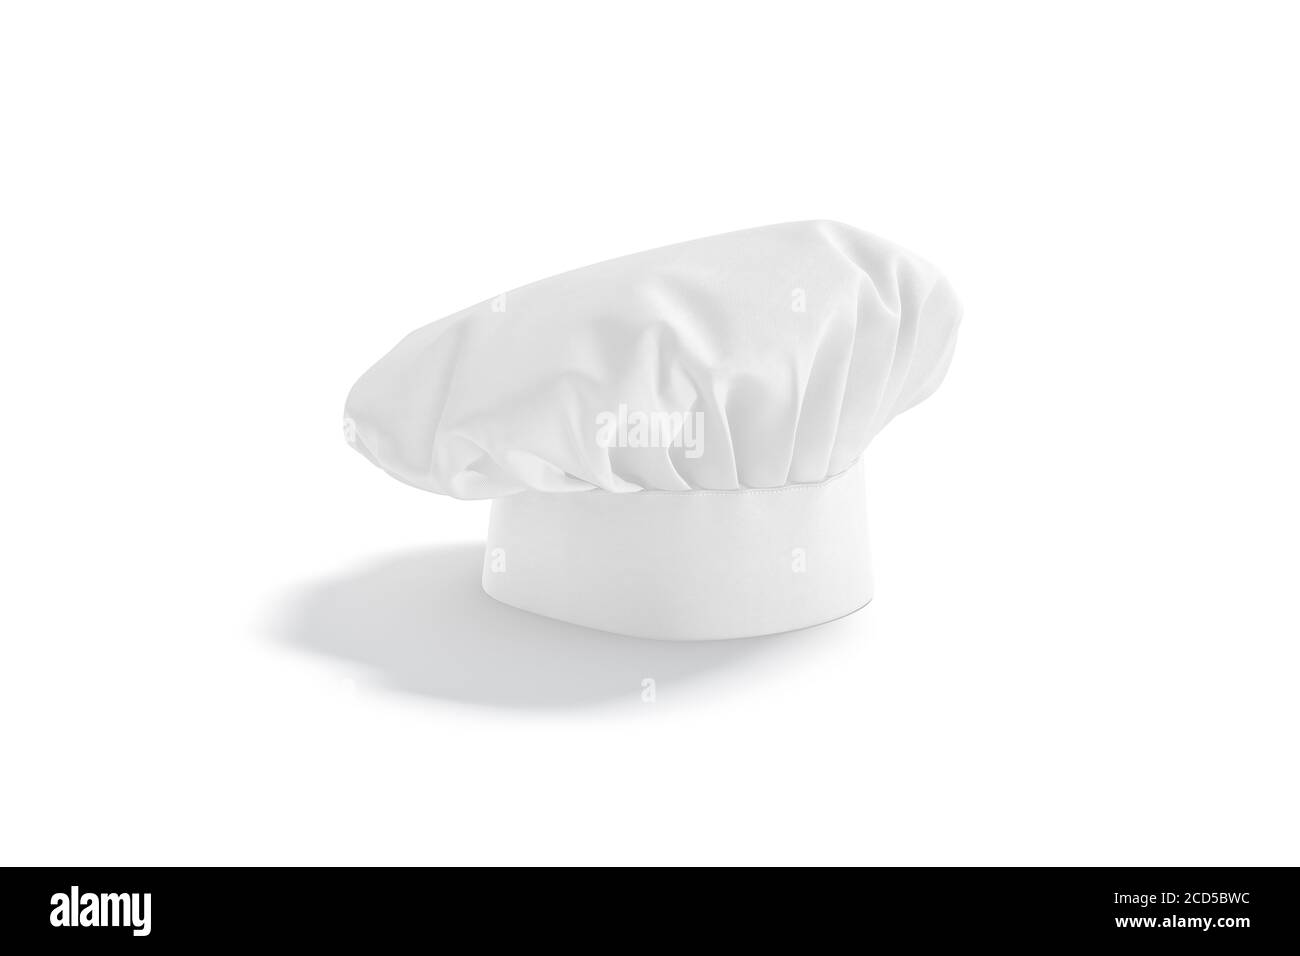 Download Blank White Toque Chef Hat Mock Up Stand Side View Stock Photo Alamy Yellowimages Mockups